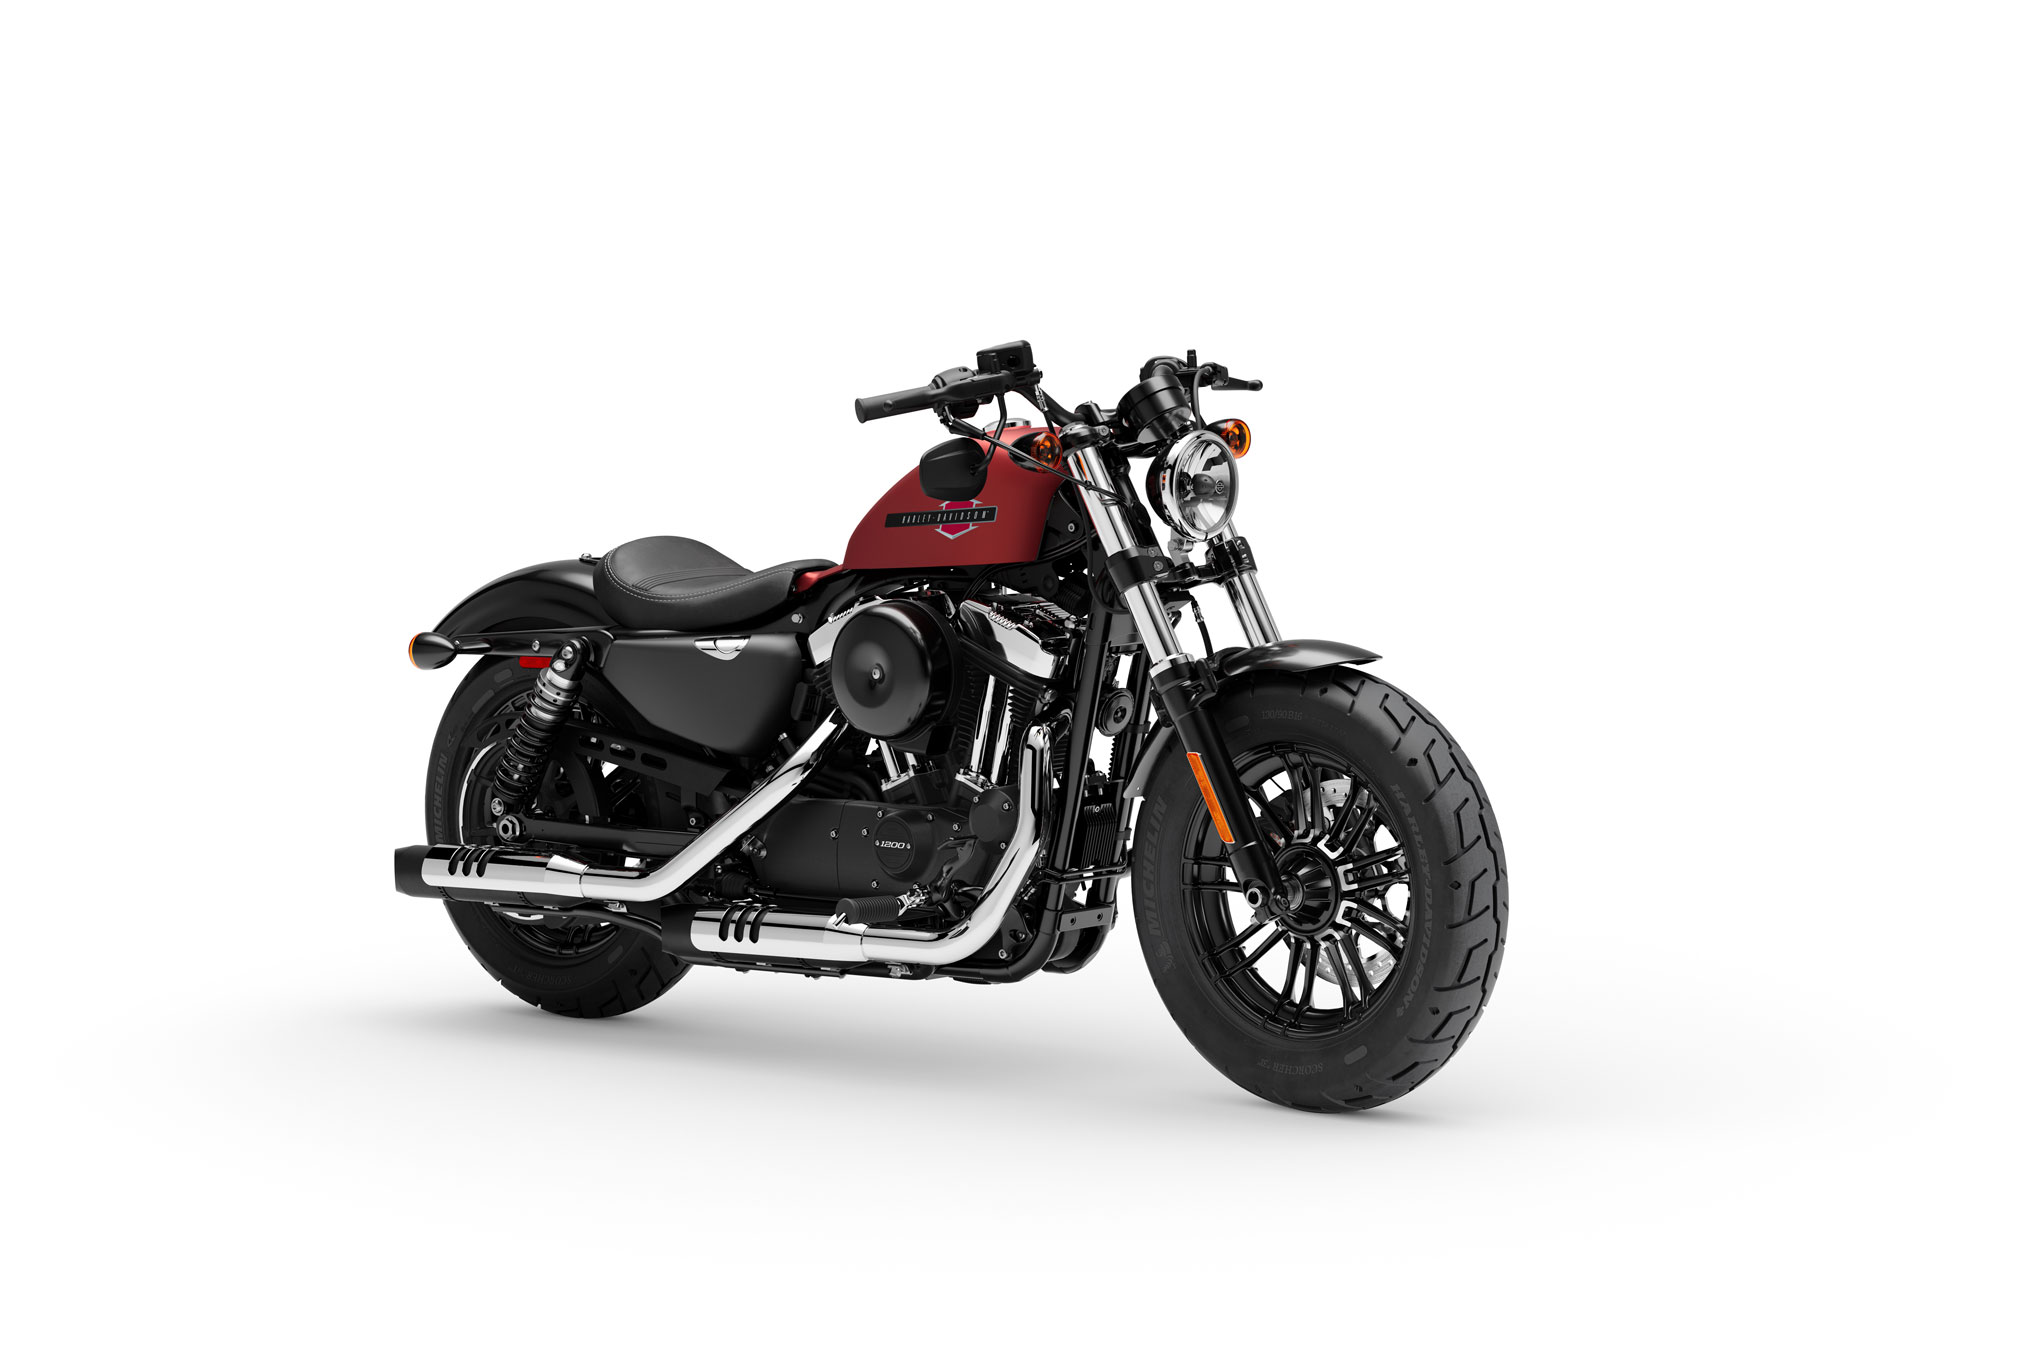  2019  Harley  Davidson  Forty  Eight  Guide  Total Motorcycle